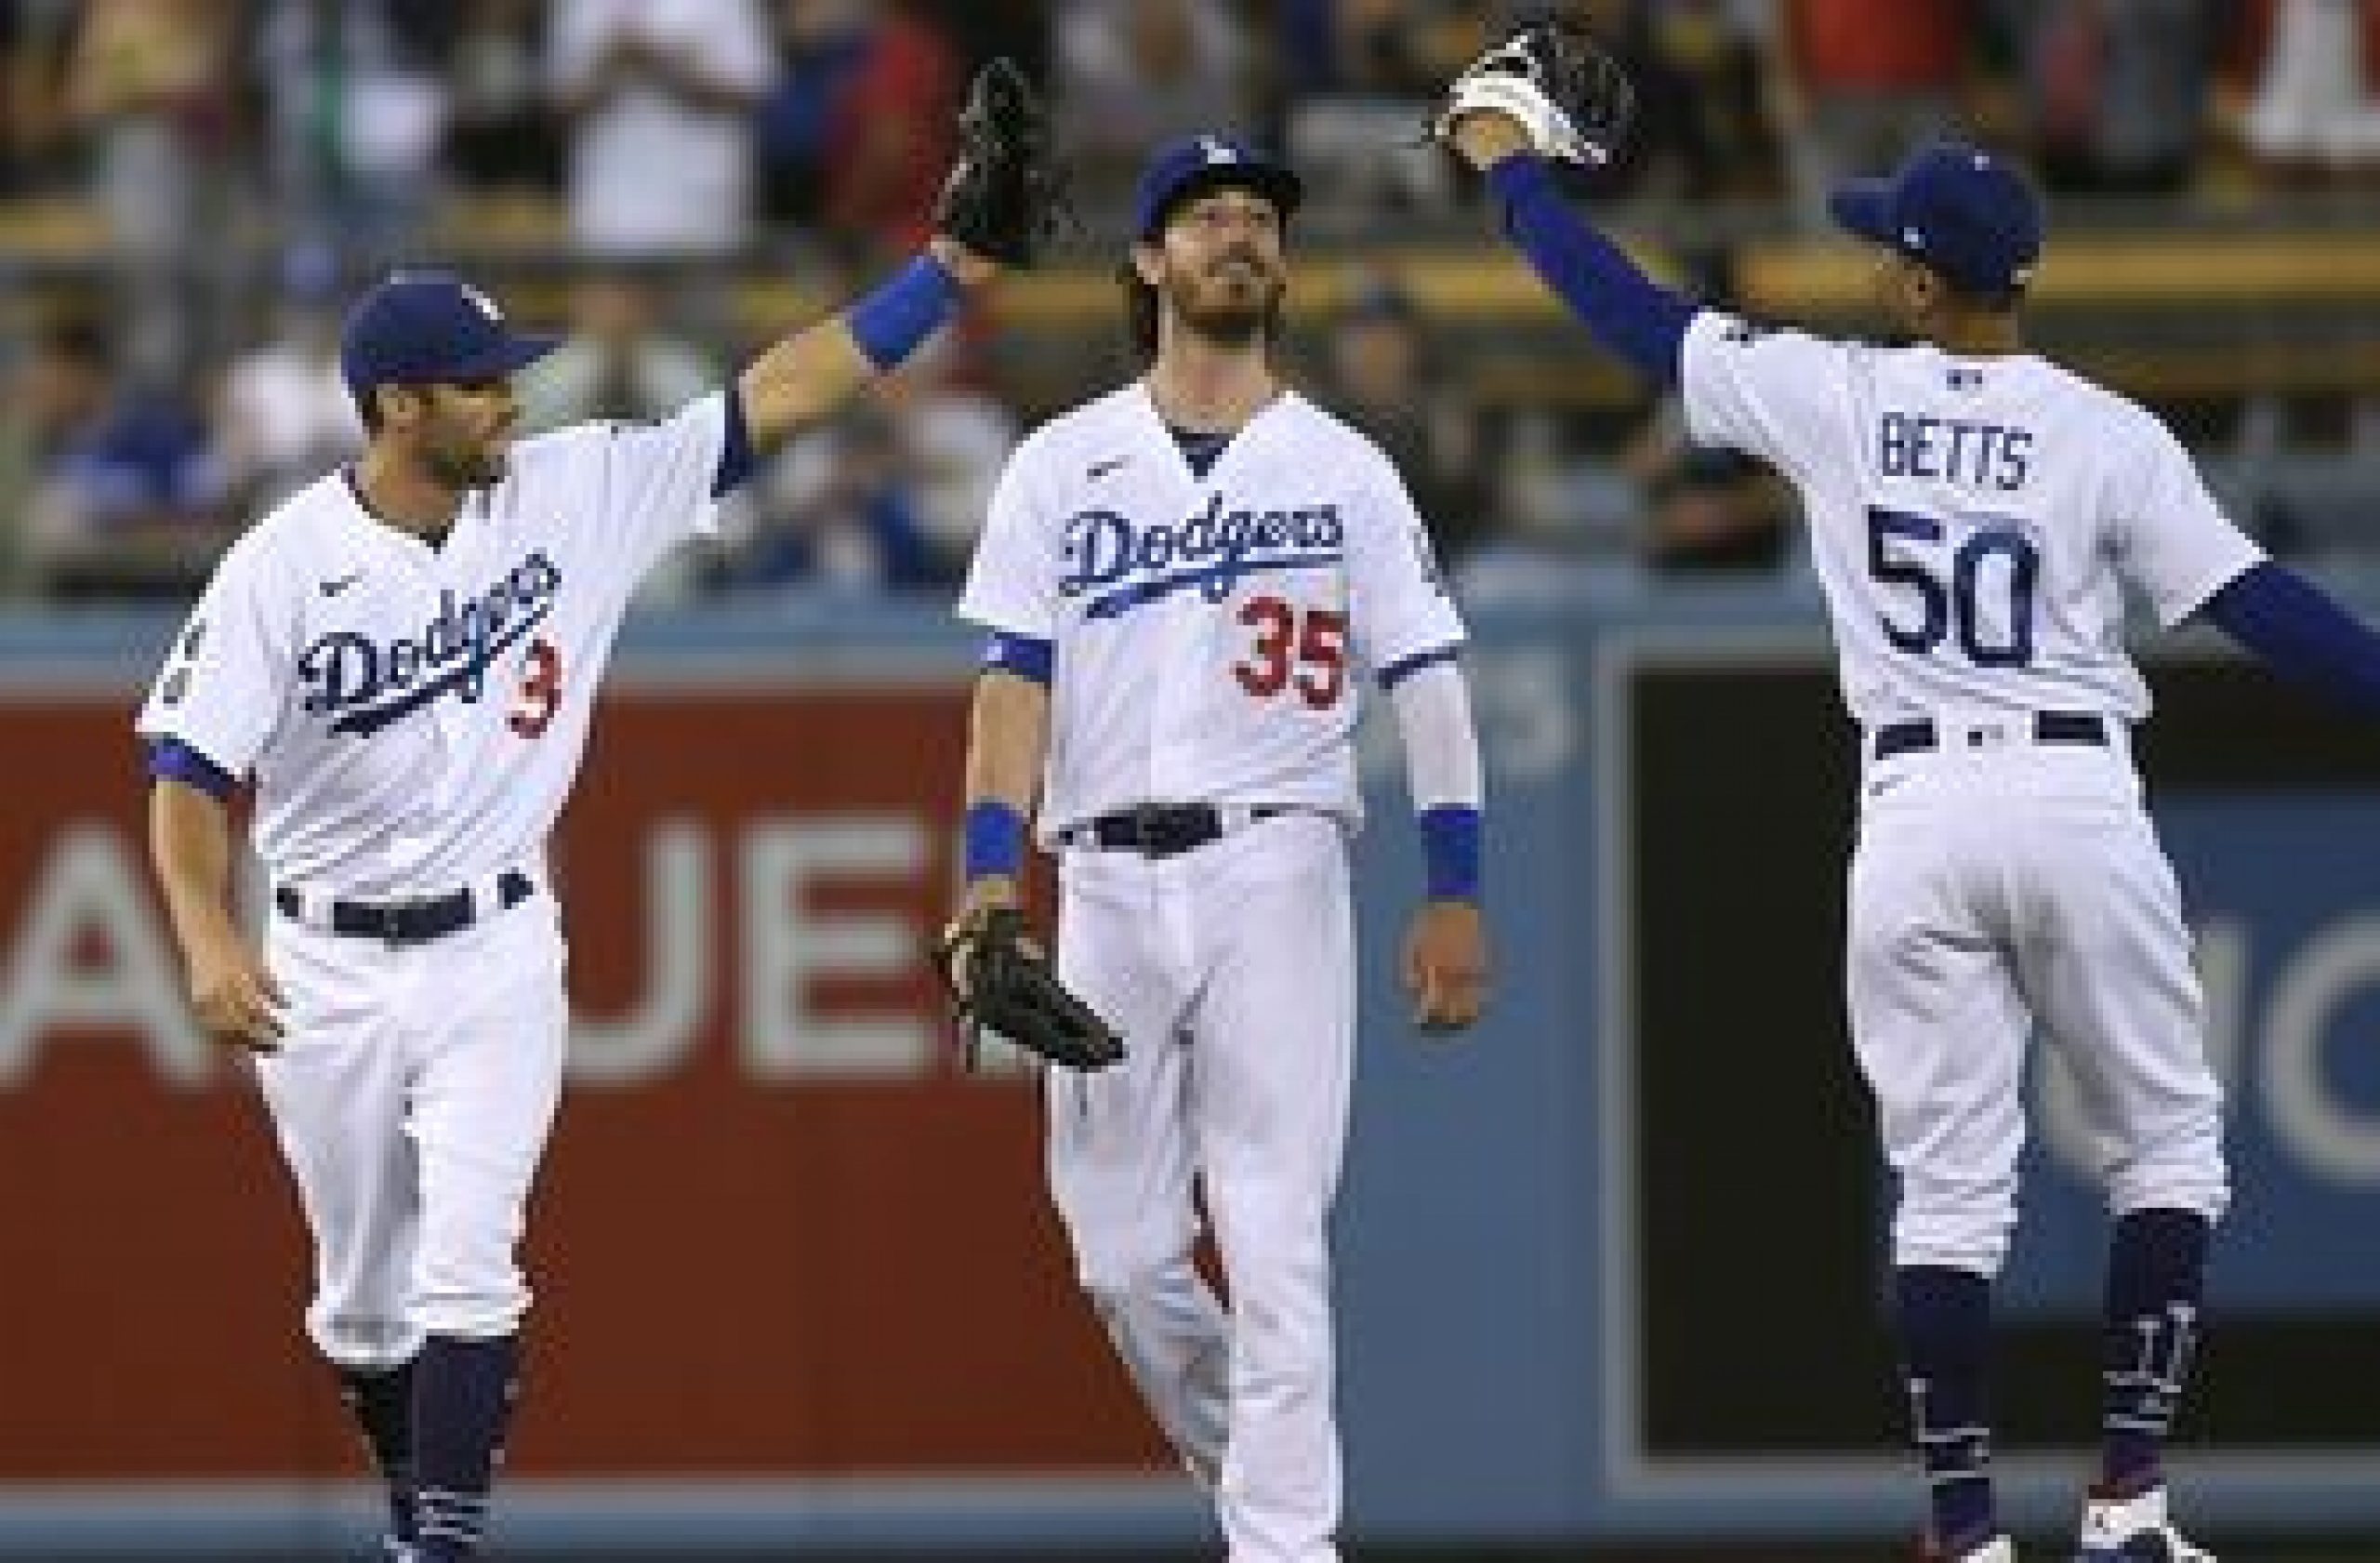 Chris Taylor registers game-winning, two RBI double in Dodgers’ 5-3 win over Angels